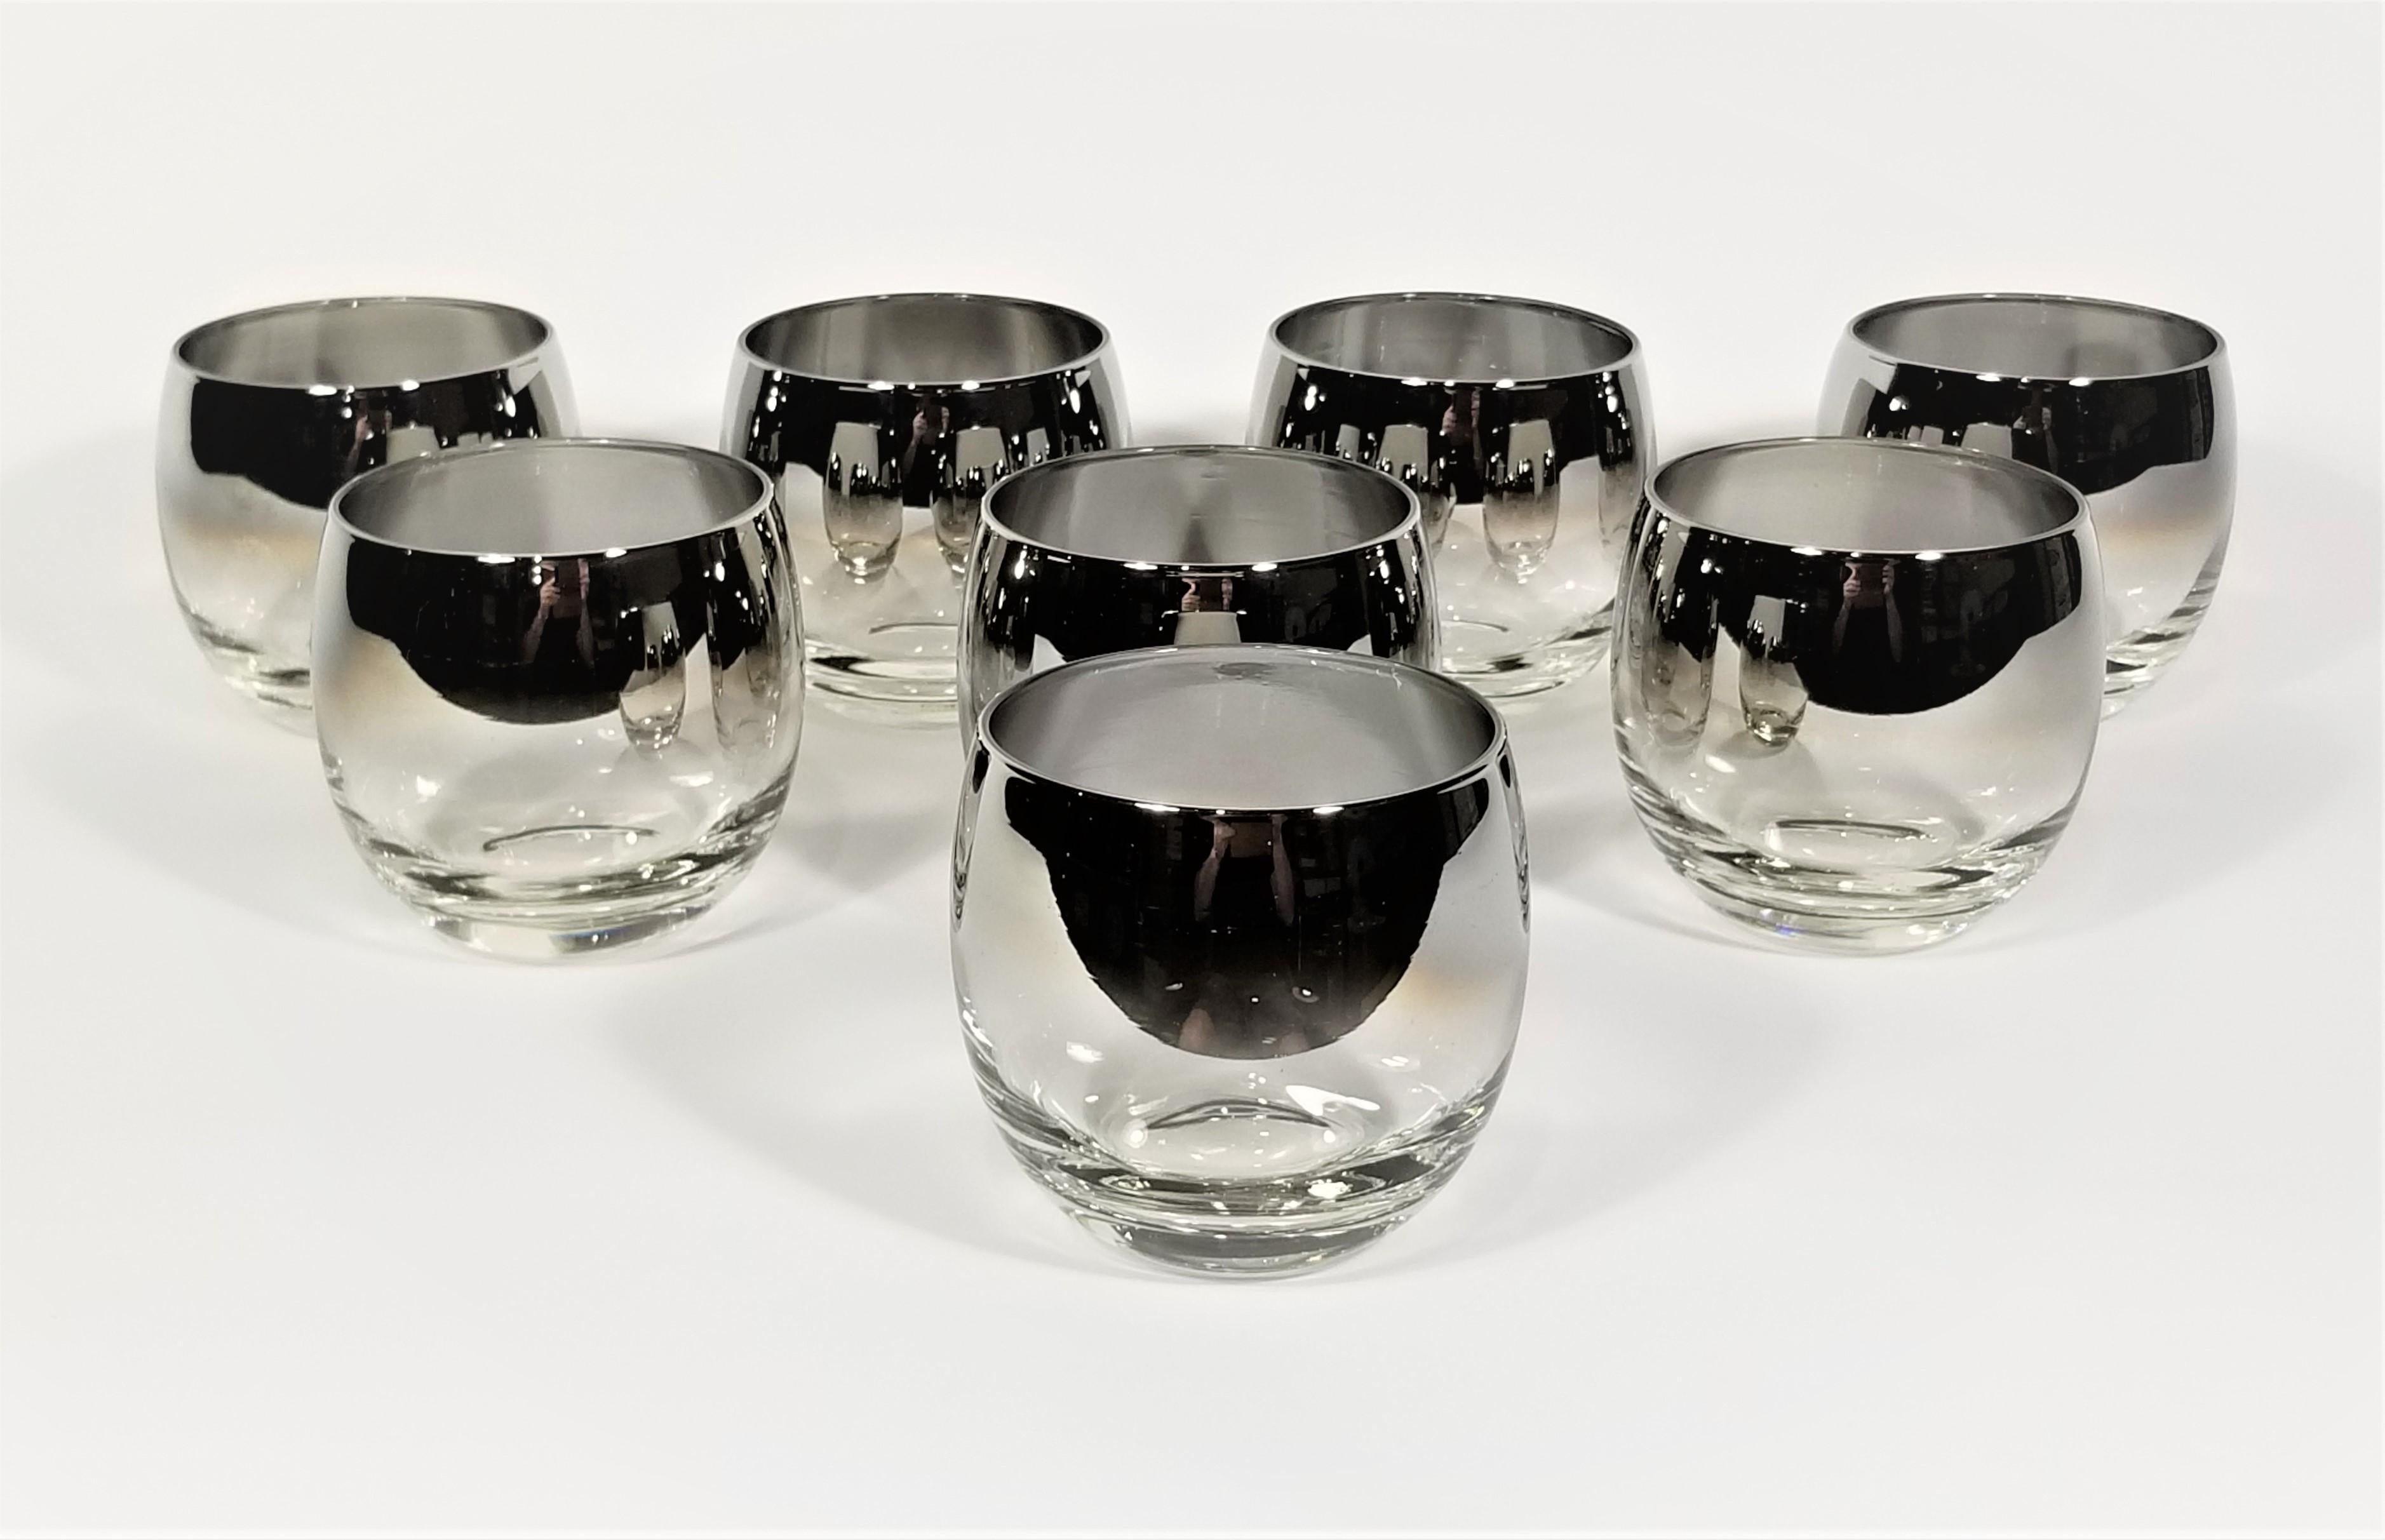 Mid century 1960s Dorothy Thorpe glassware barware. Silver fade design. Often referred to as Roly Poly glasses due to their round modern shape. Set of 8.